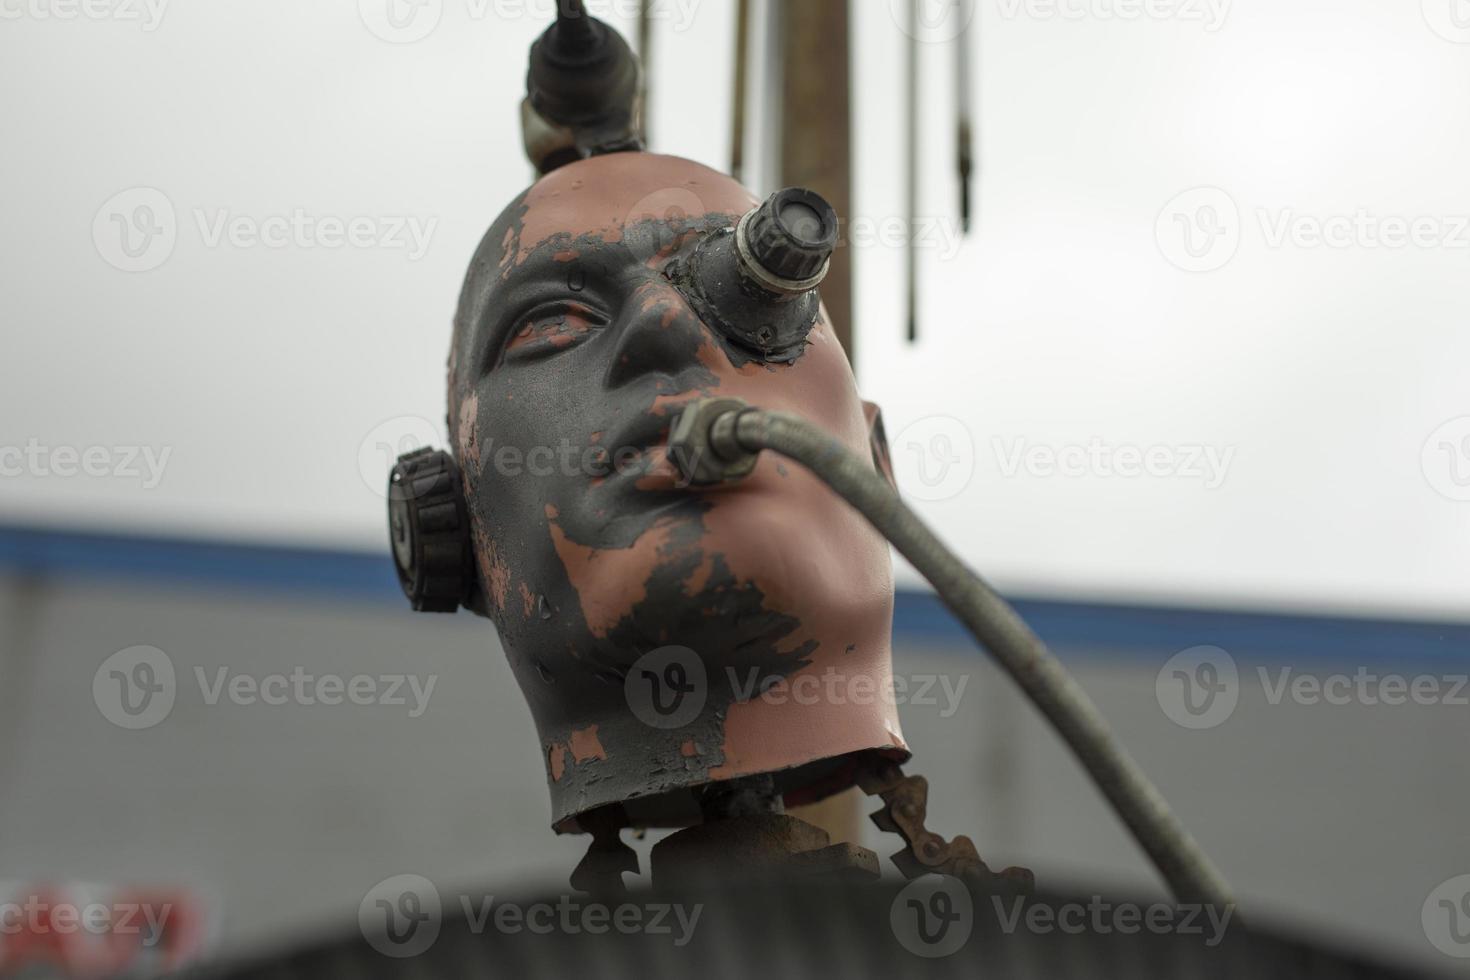 Head of mannequin in style of steam punk. Details built into head. Sculpture at festival. photo